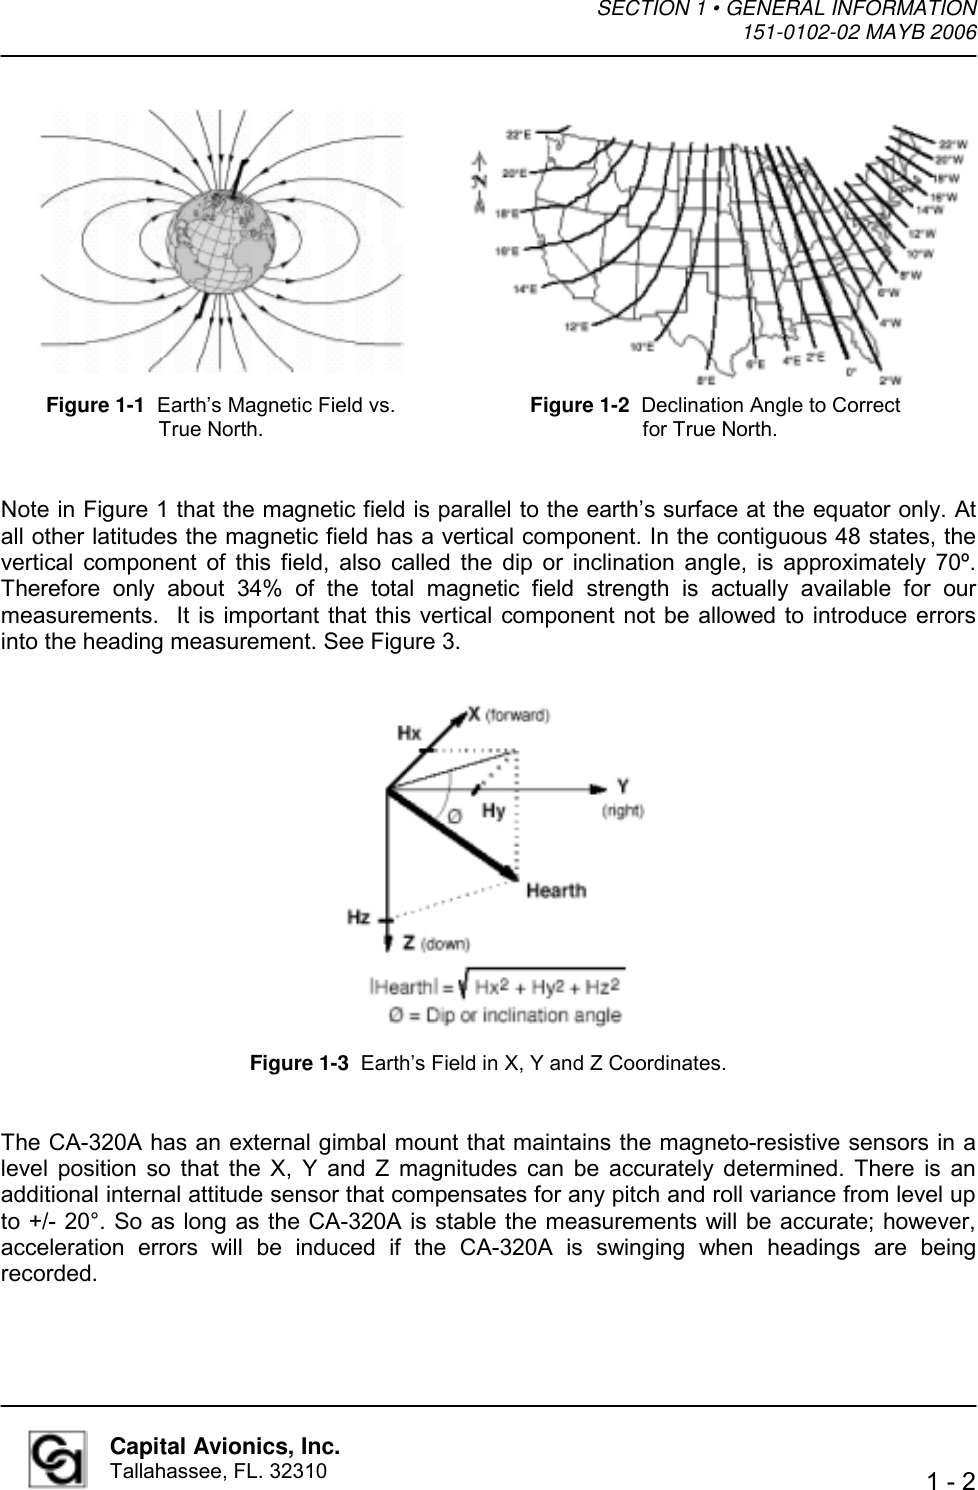 SECTION 1 • GENERAL INFORMATION  151-0102-02 MAYB 2006   1 - 2  Capital Avionics, Inc. Tallahassee, FL. 32310                Note in Figure 1 that the magnetic field is parallel to the earth’s surface at the equator only. At all other latitudes the magnetic field has a vertical component. In the contiguous 48 states, the vertical component of this field, also called the dip or inclination angle, is approximately 70º. Therefore only about 34% of the total magnetic field strength is actually available for our measurements.  It is important that this vertical component not be allowed to introduce errors into the heading measurement. See Figure 3.                    The CA-320A has an external gimbal mount that maintains the magneto-resistive sensors in a level position so that the X, Y and Z magnitudes can be accurately determined. There is an additional internal attitude sensor that compensates for any pitch and roll variance from level up to +/- 20°. So as long as the CA-320A is stable the measurements will be accurate; however, acceleration errors will be induced if the CA-320A is swinging when headings are being recorded.  Figure 1-1  Earth’s Magnetic Field vs. True North. Figure 1-3  Earth’s Field in X, Y and Z Coordinates. Figure 1-2  Declination Angle to Correct for True North. 